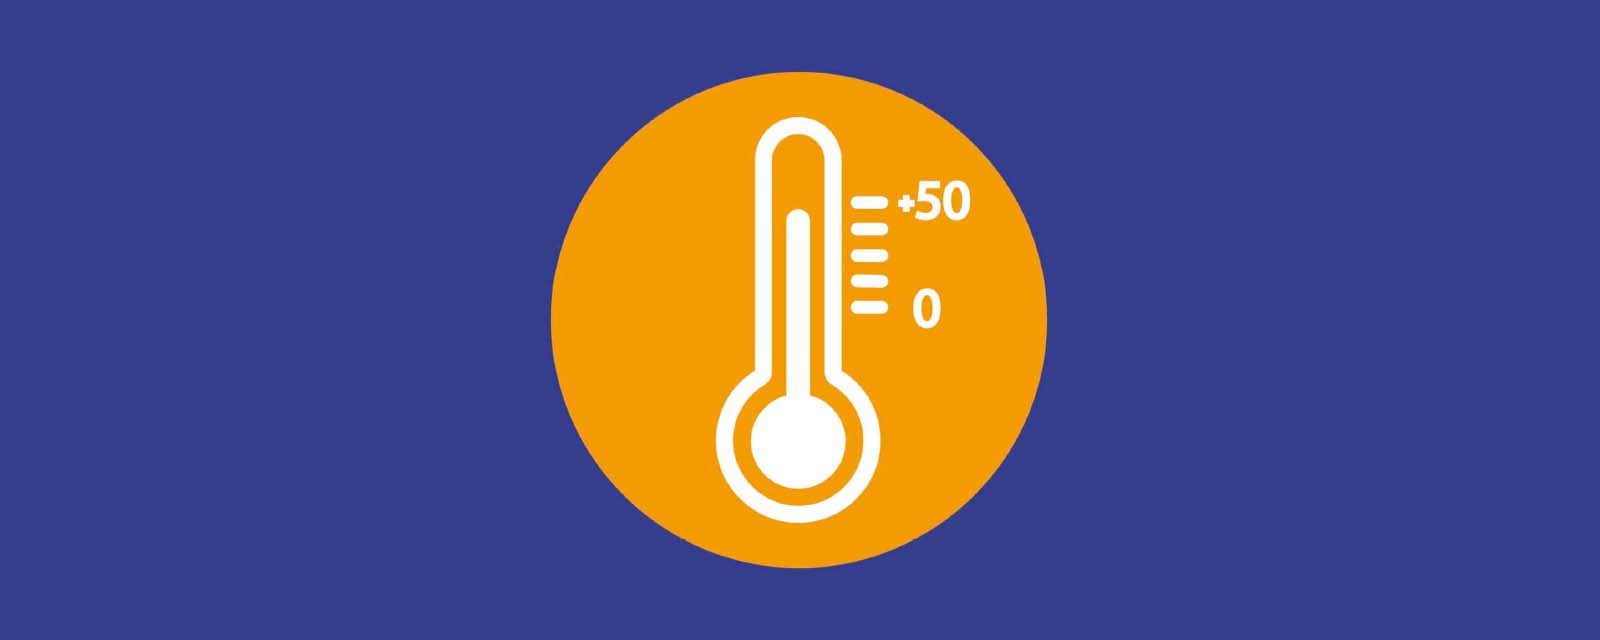 thermometer 1600x640